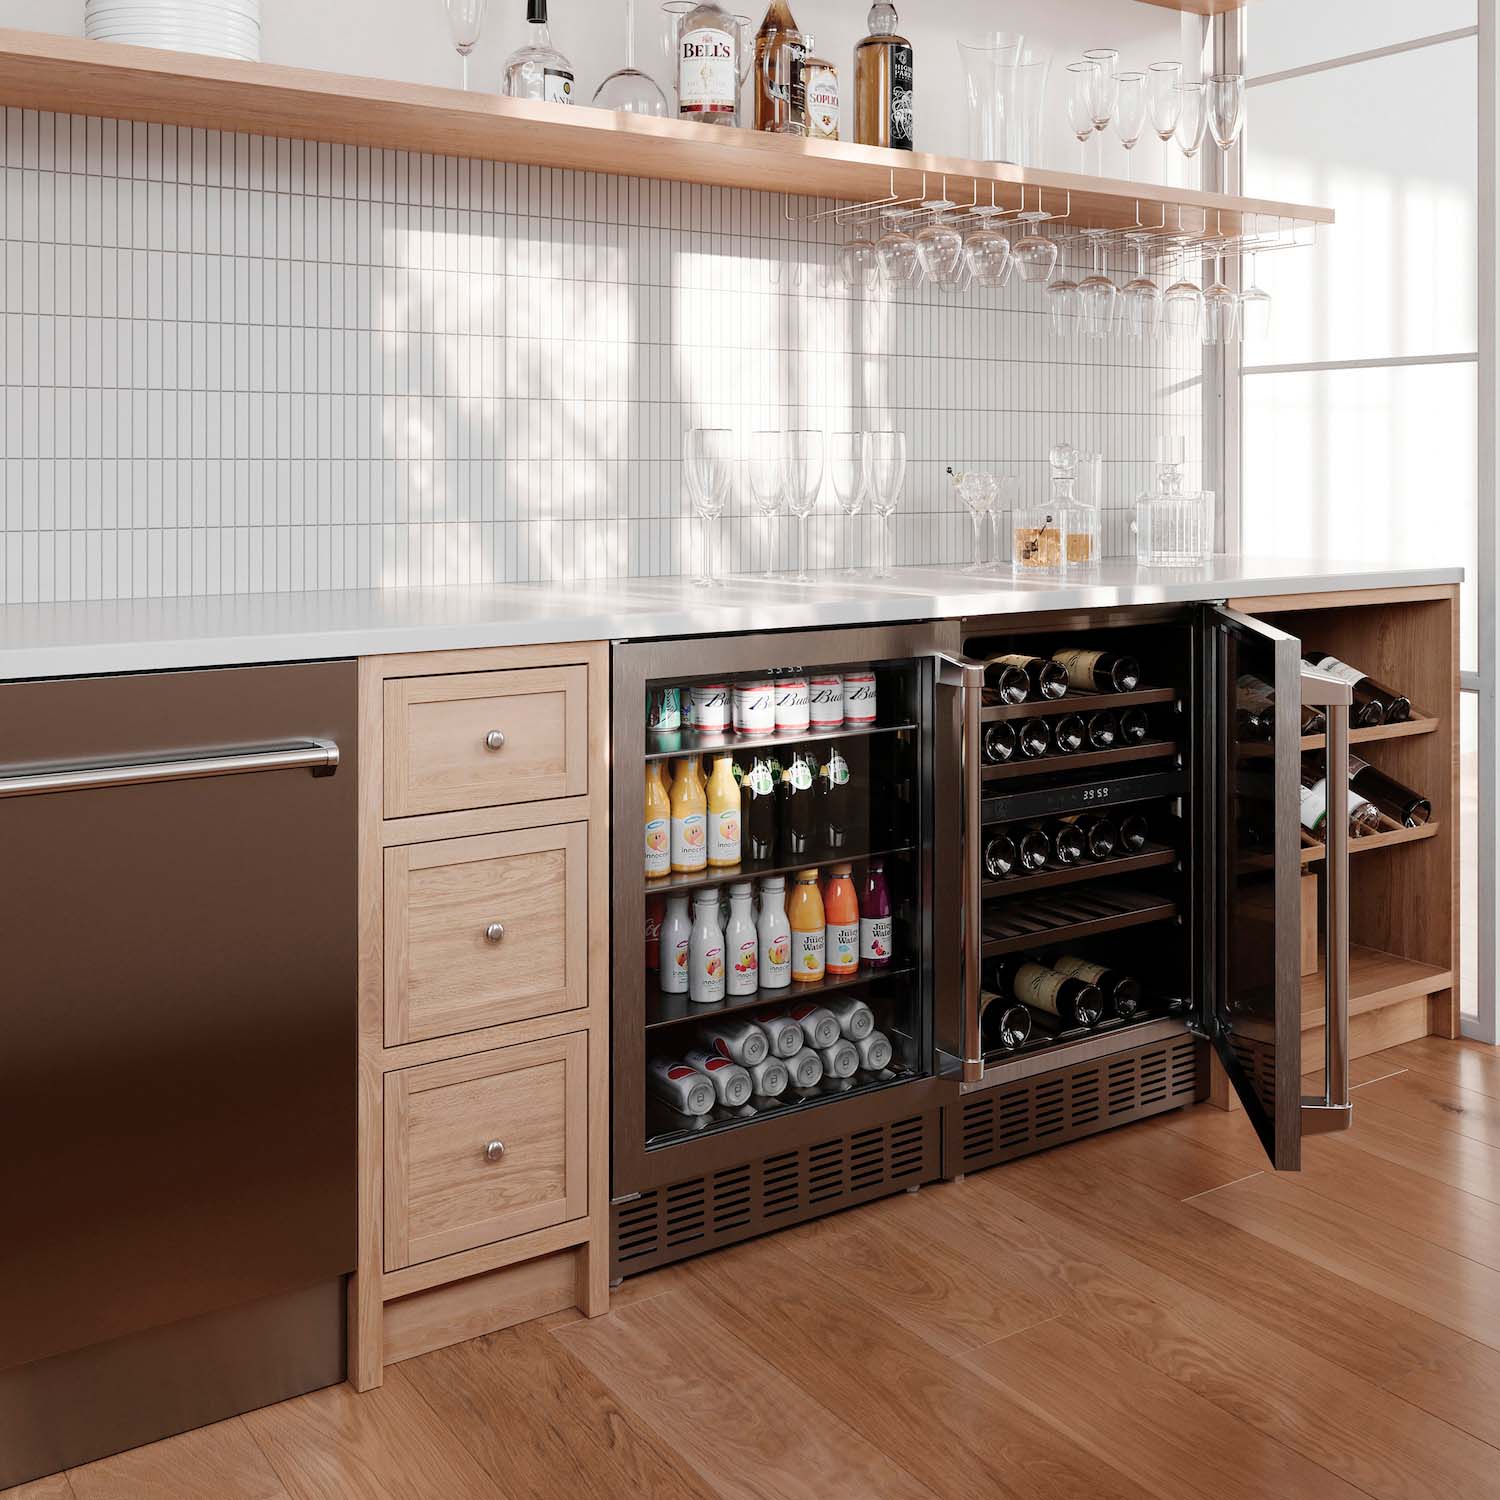 ZLINE Monument Beverage Fridge and Dual Zone Wine Cooler side-by-side in a home bar area